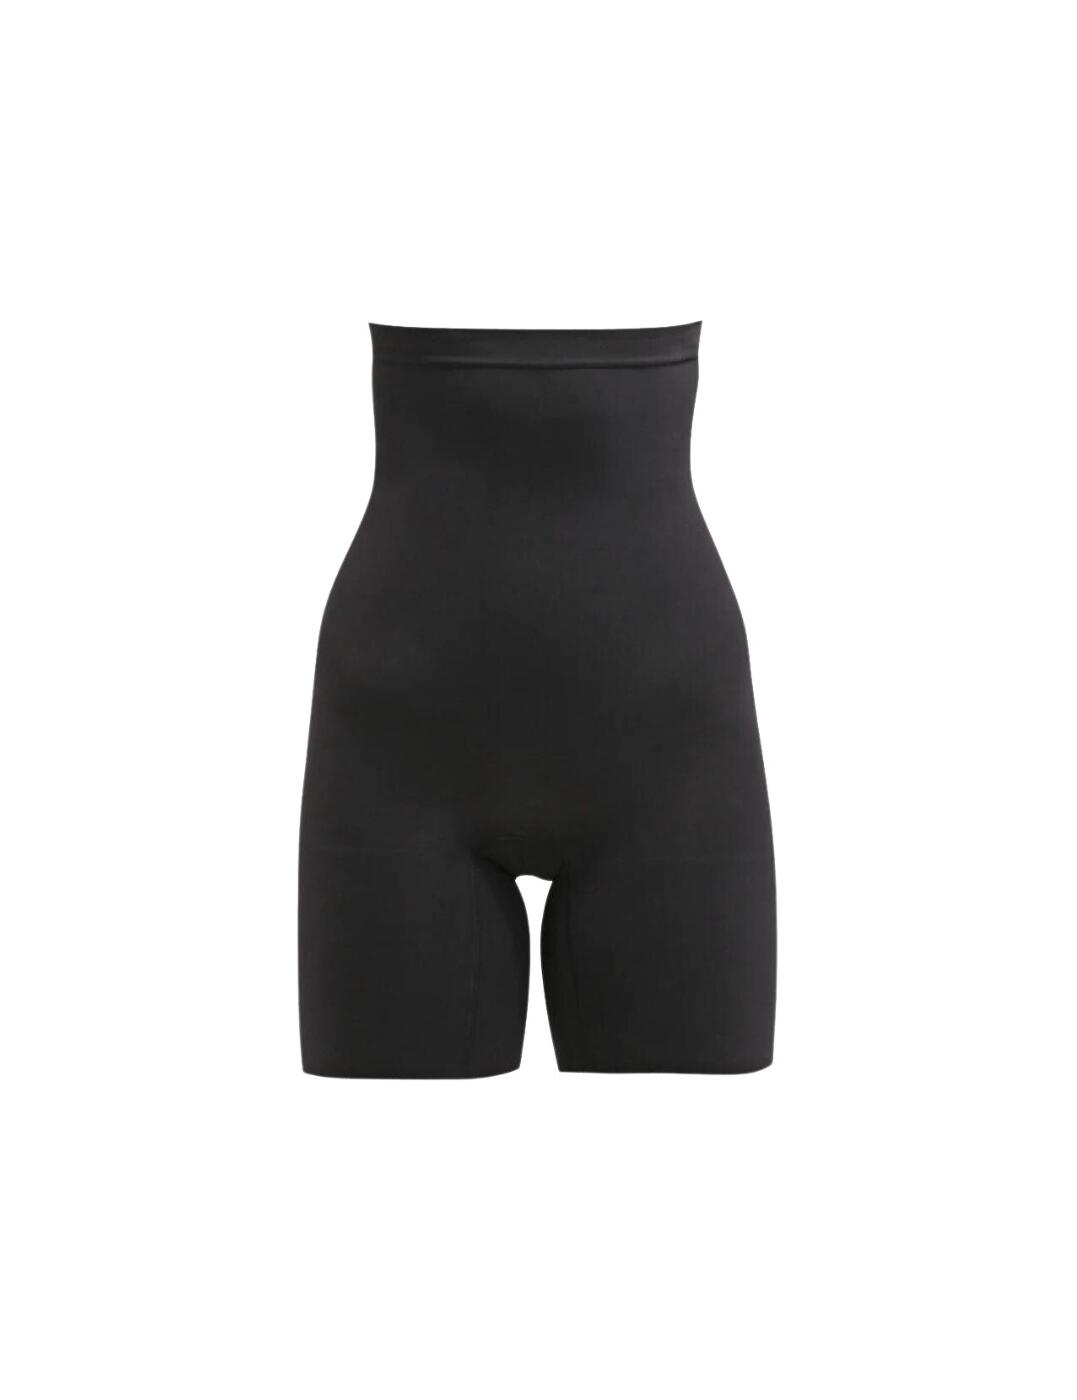 Spanx - Trust Your Thinstincts 2.0 High Waisted Mid-Thigh Short